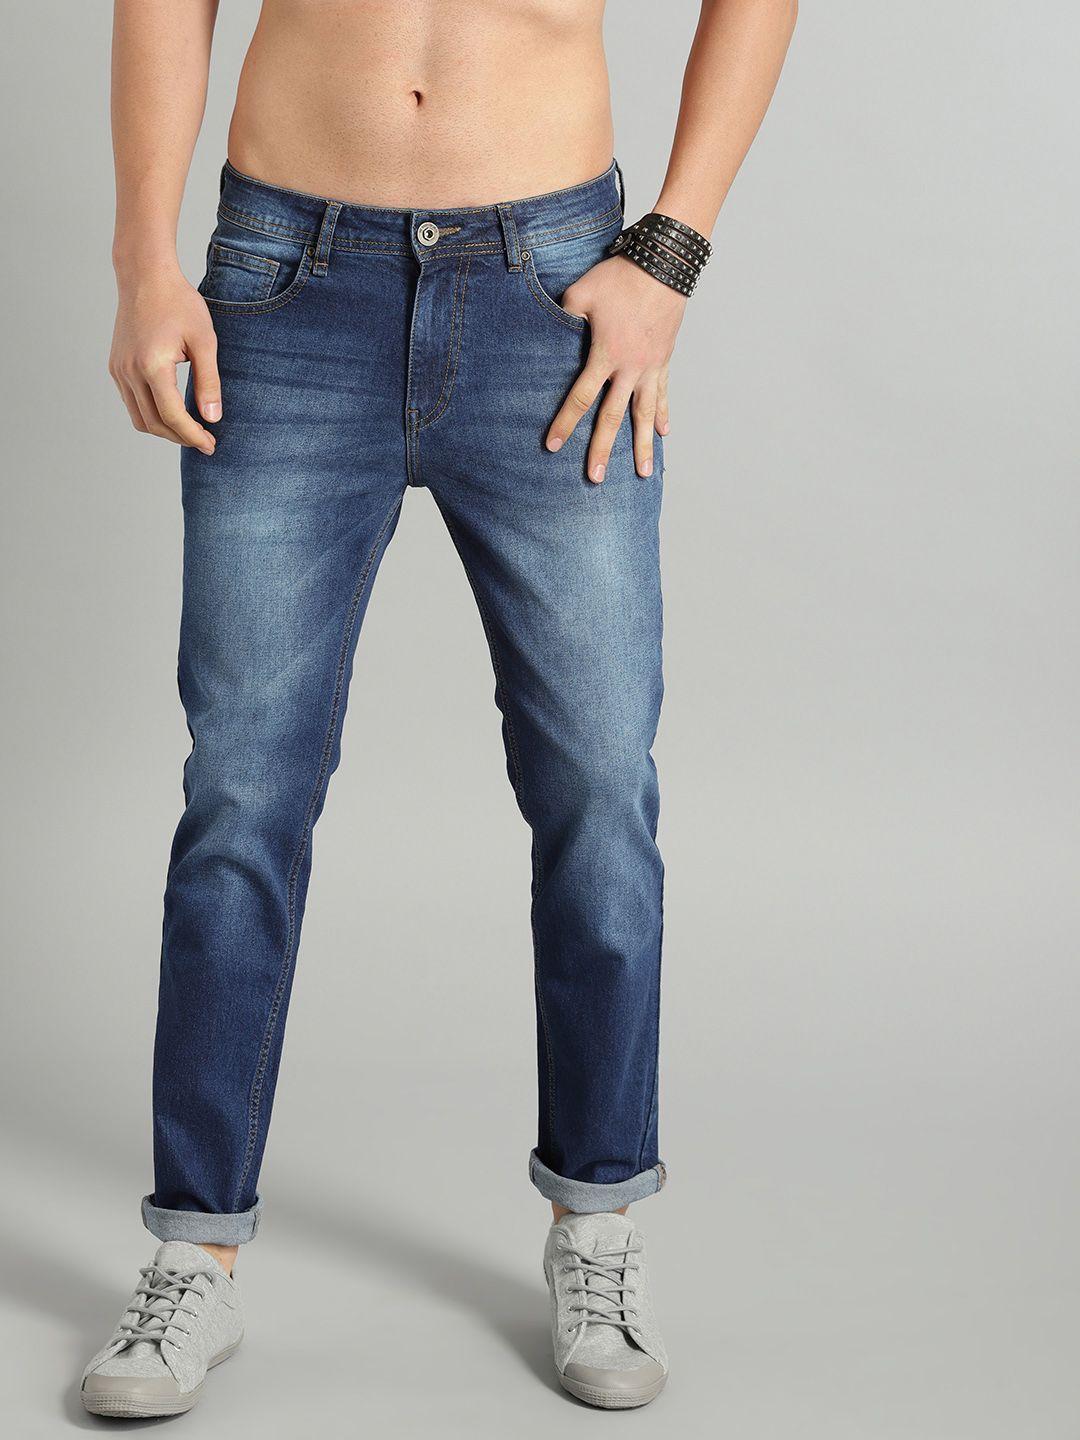 the roadster lifestyle co men blue skinny fit mid-rise clean look stretchable jeans